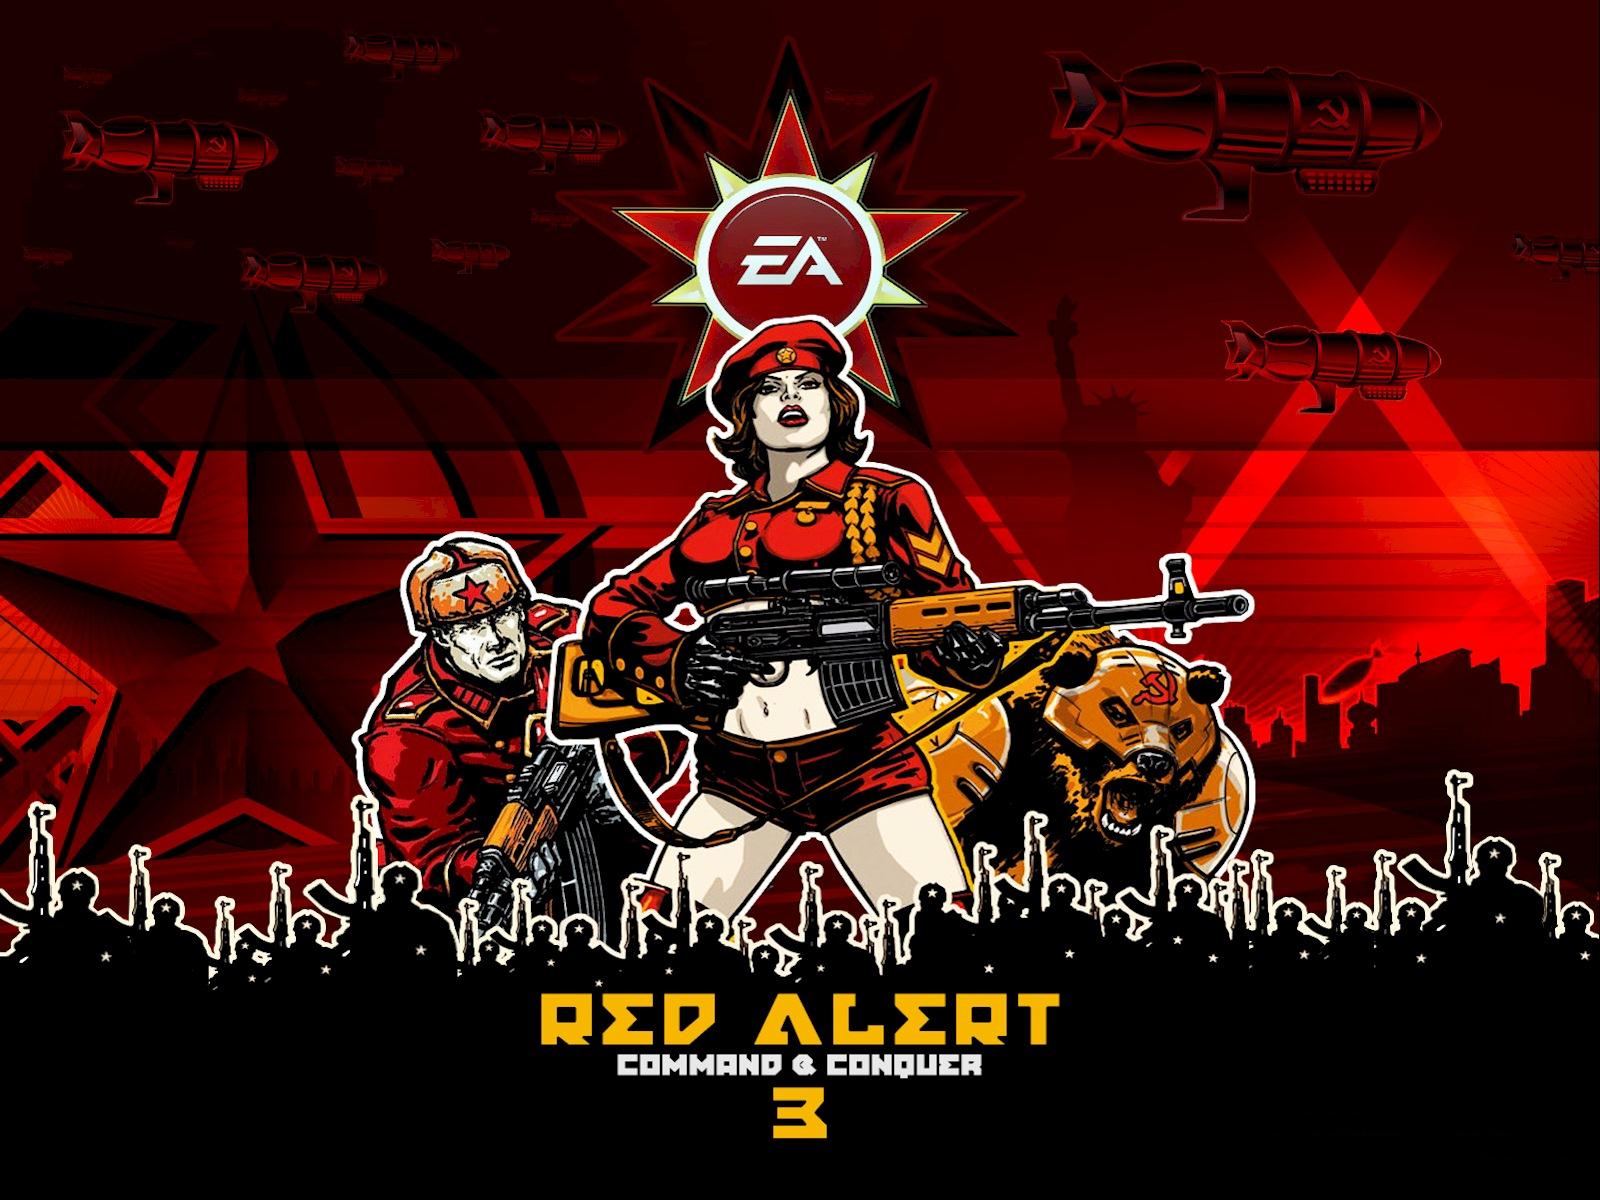 Download red alert 3 isoHunt the Bit Torrent search engine